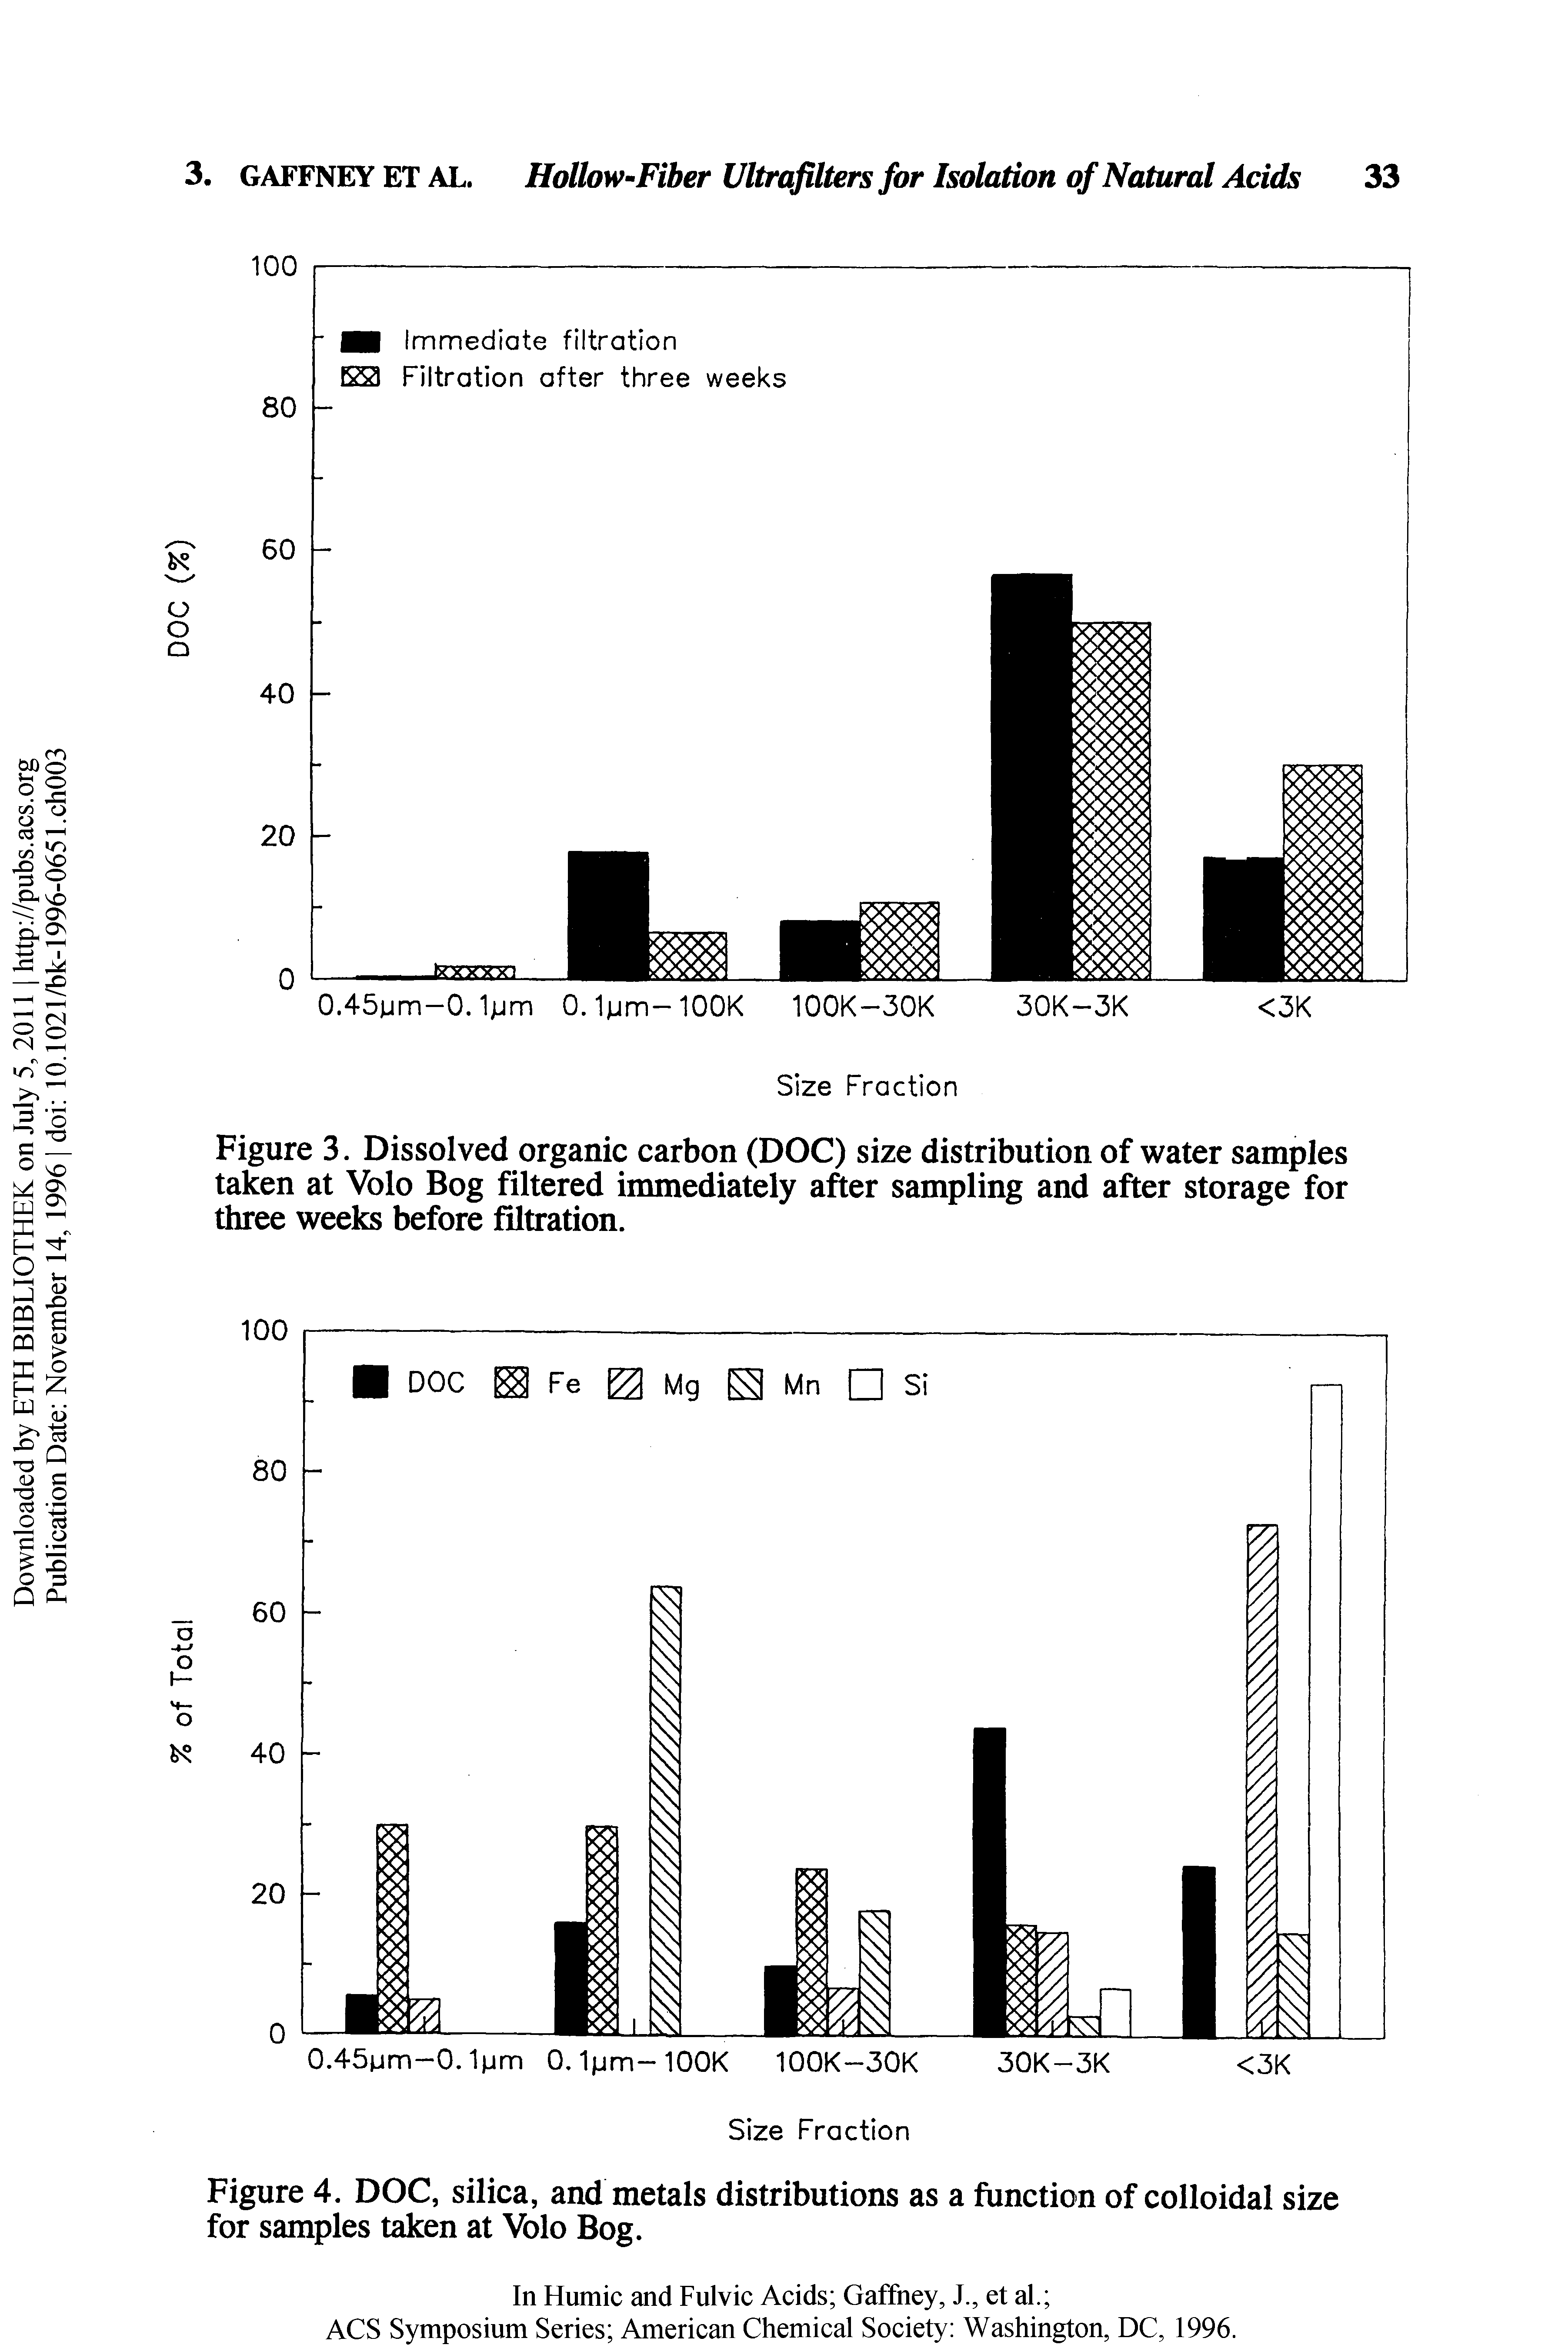 Figure 3. Dissolved organic carbon (DOC) size distribution of water samples taken at Volo Bog filtered immediately after sampling and after storage for three weeks before filtration.